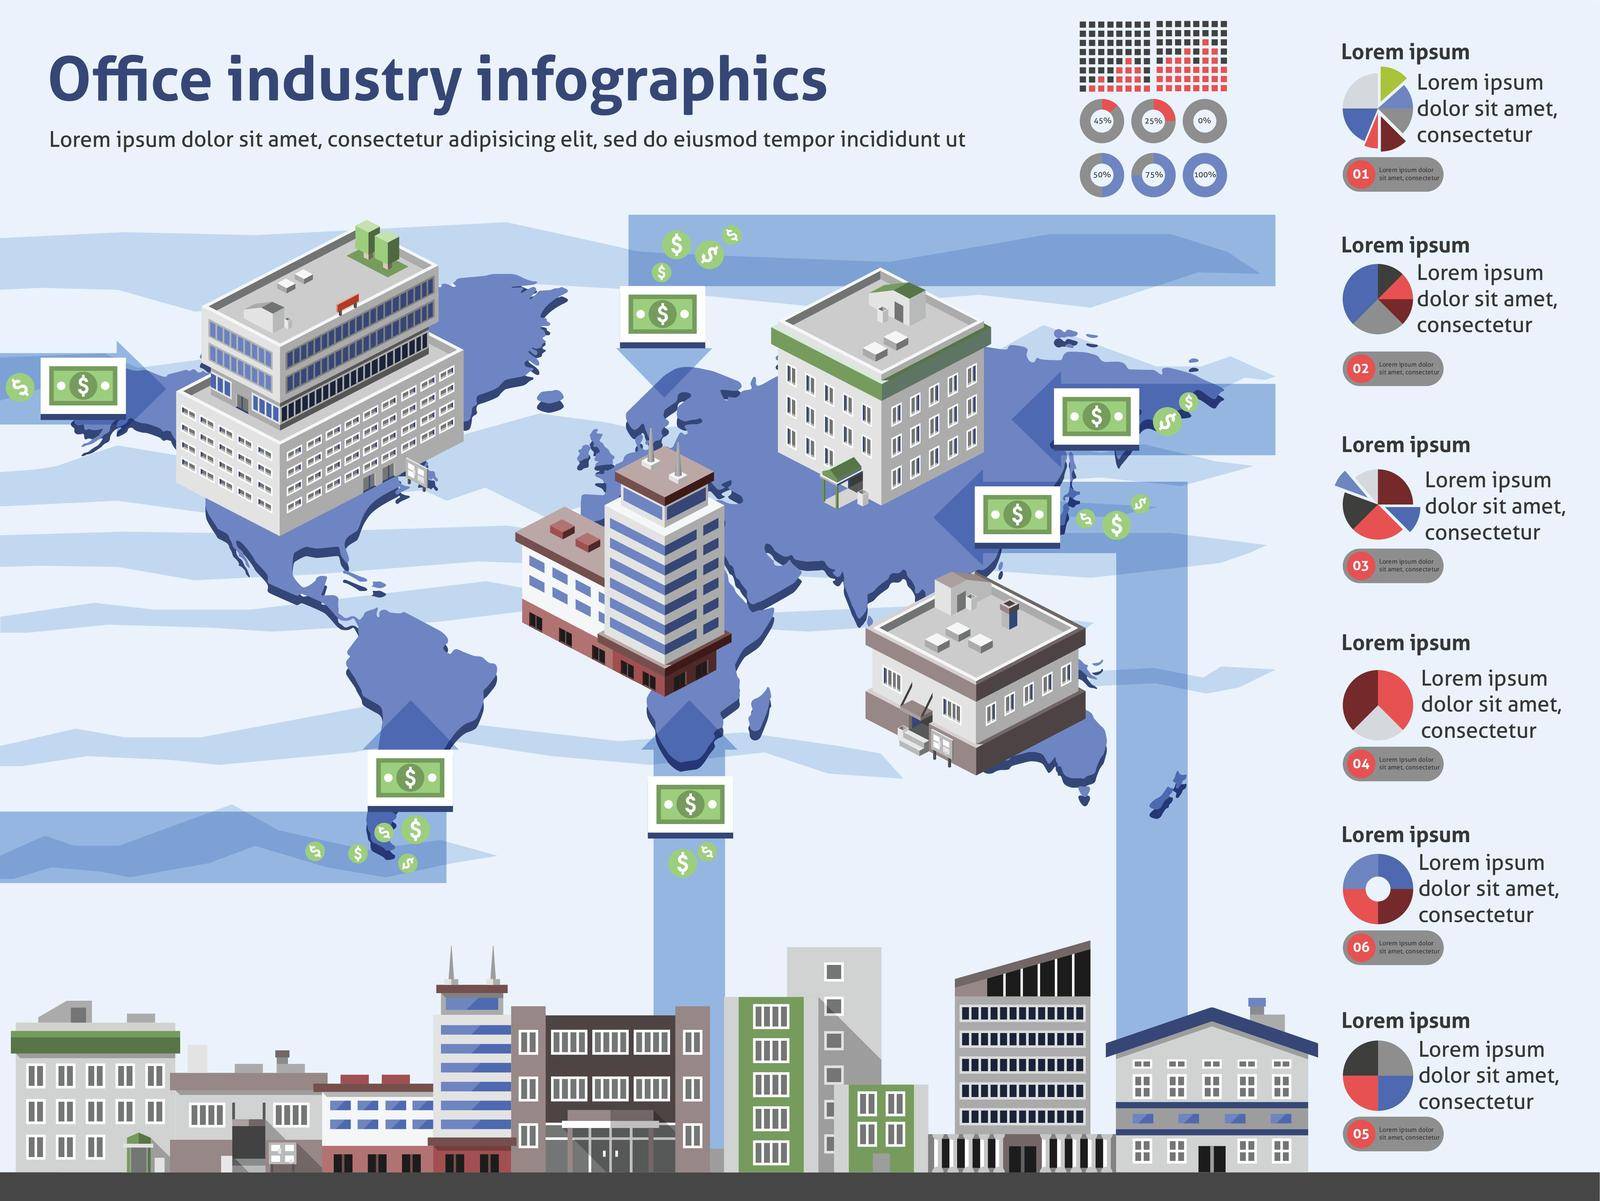 Office industry infographics with business buildings world map and charts vector illustration